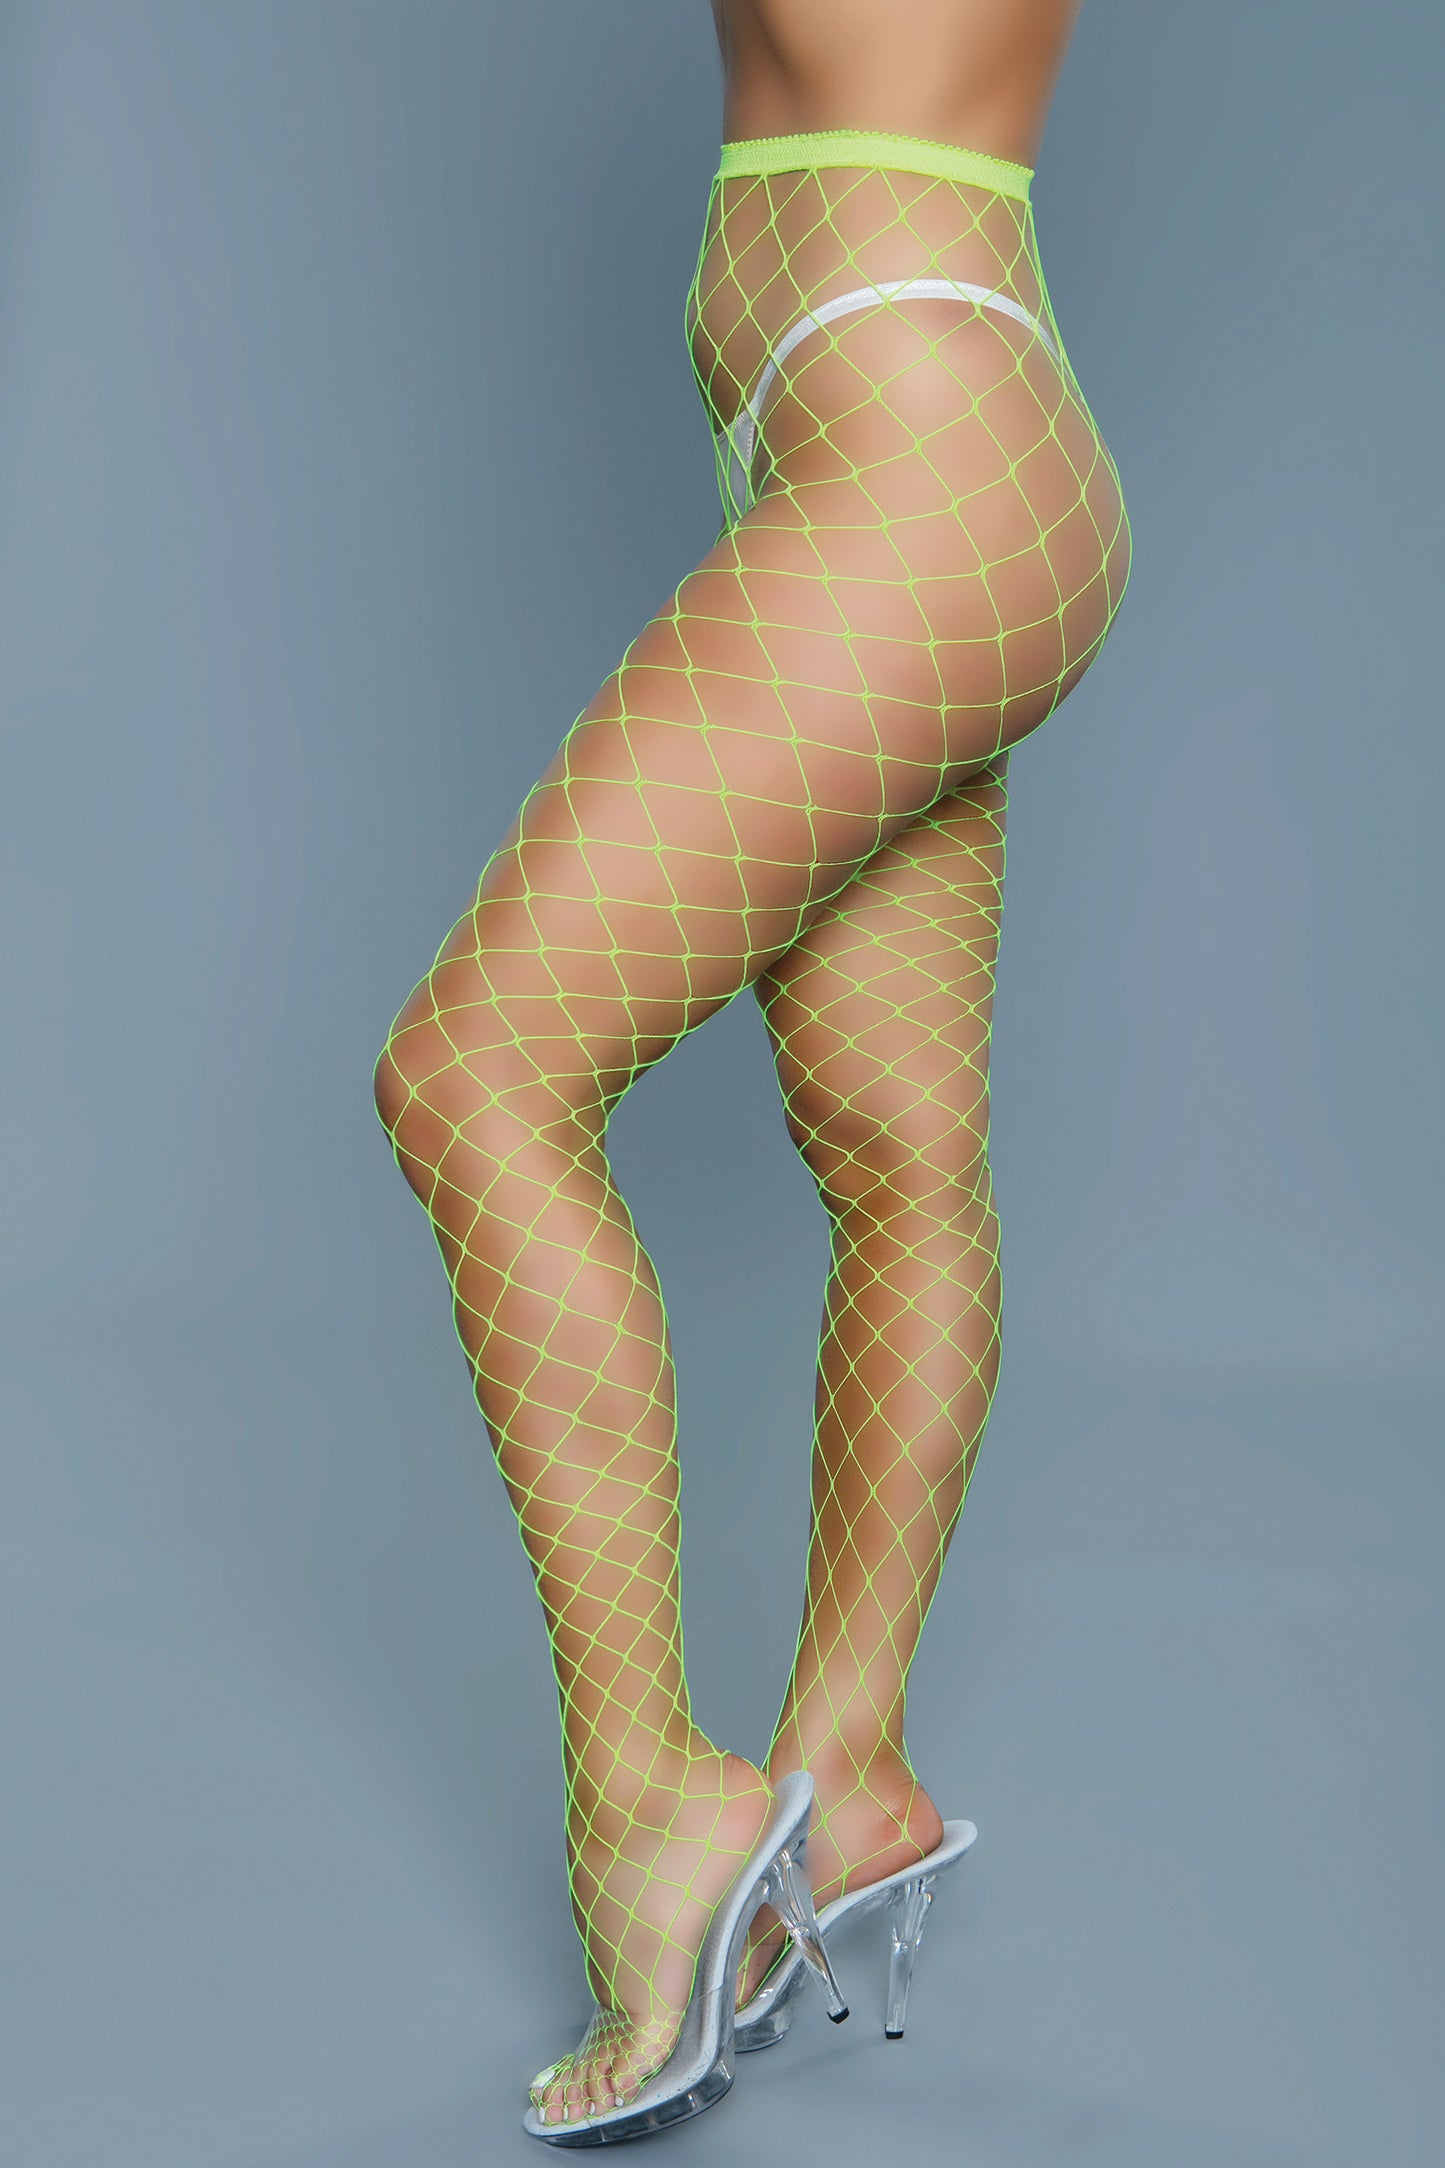 Oversized Fishnet Pantyhose - O/S -  All Colors